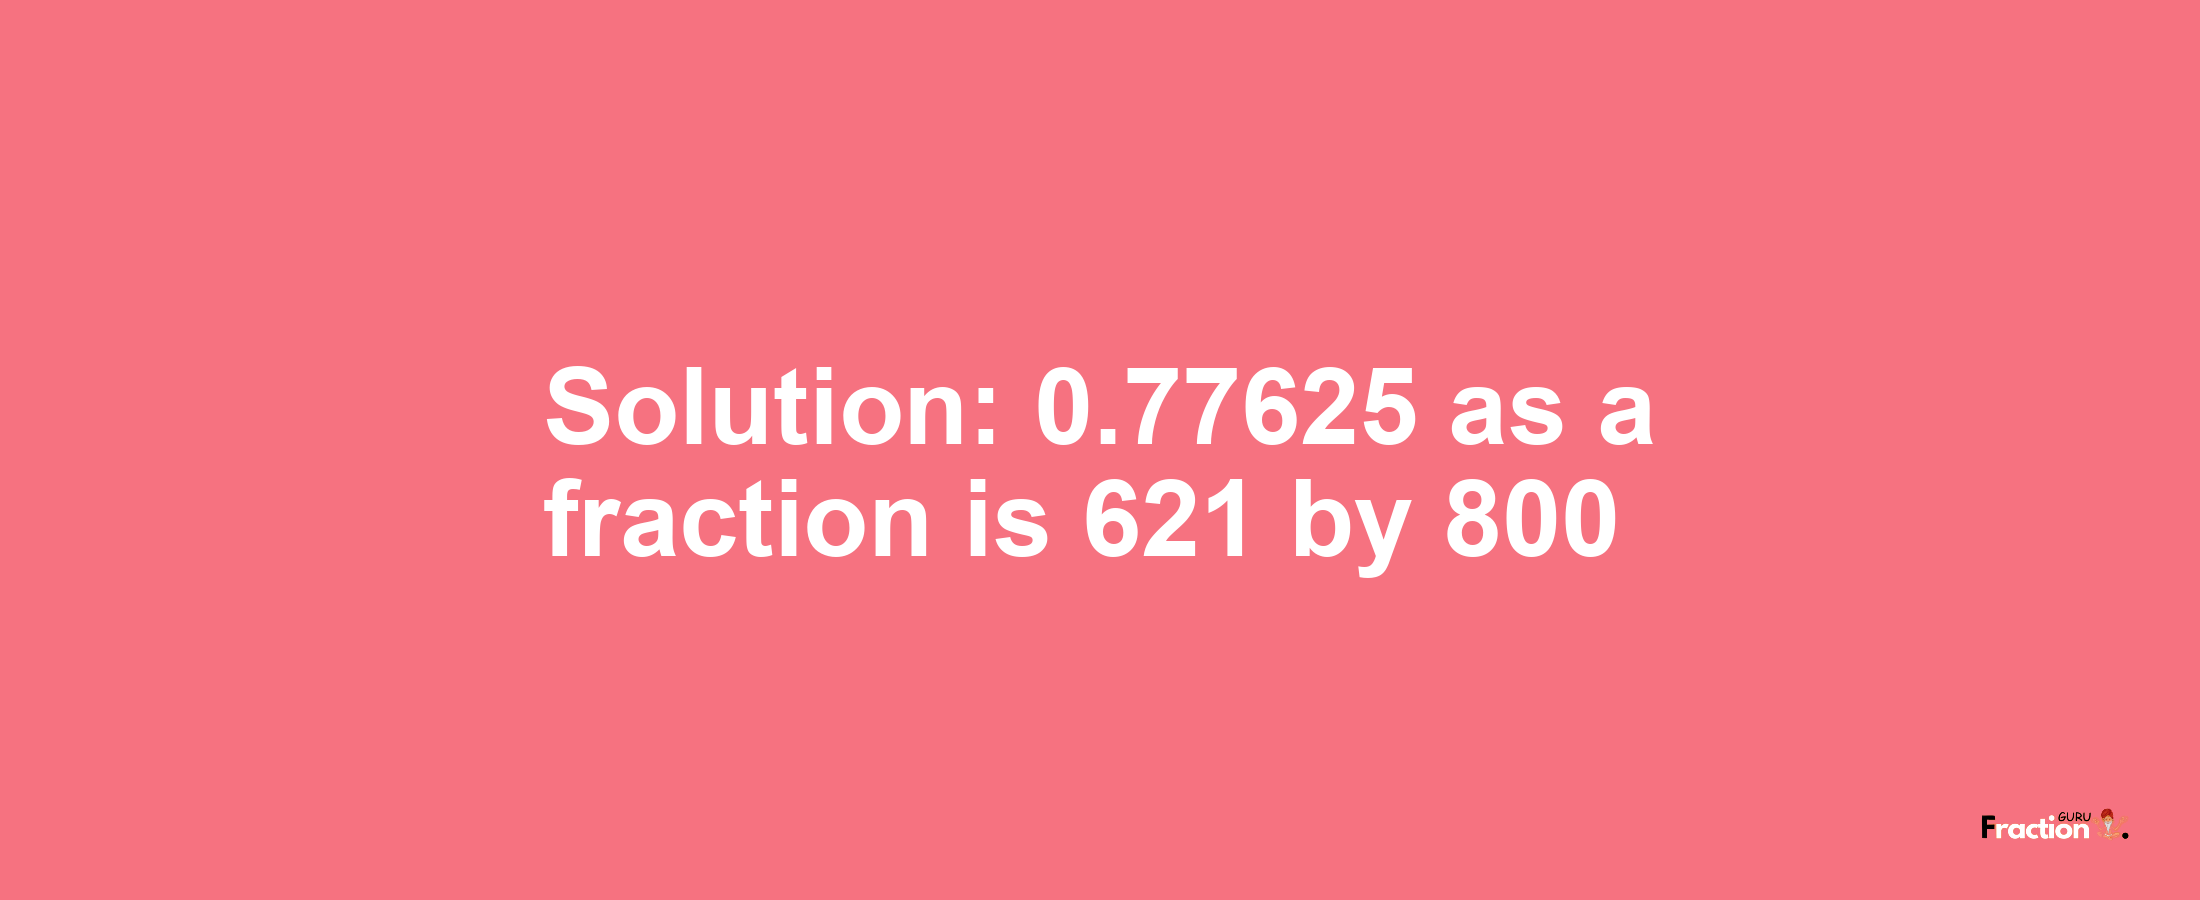 Solution:0.77625 as a fraction is 621/800